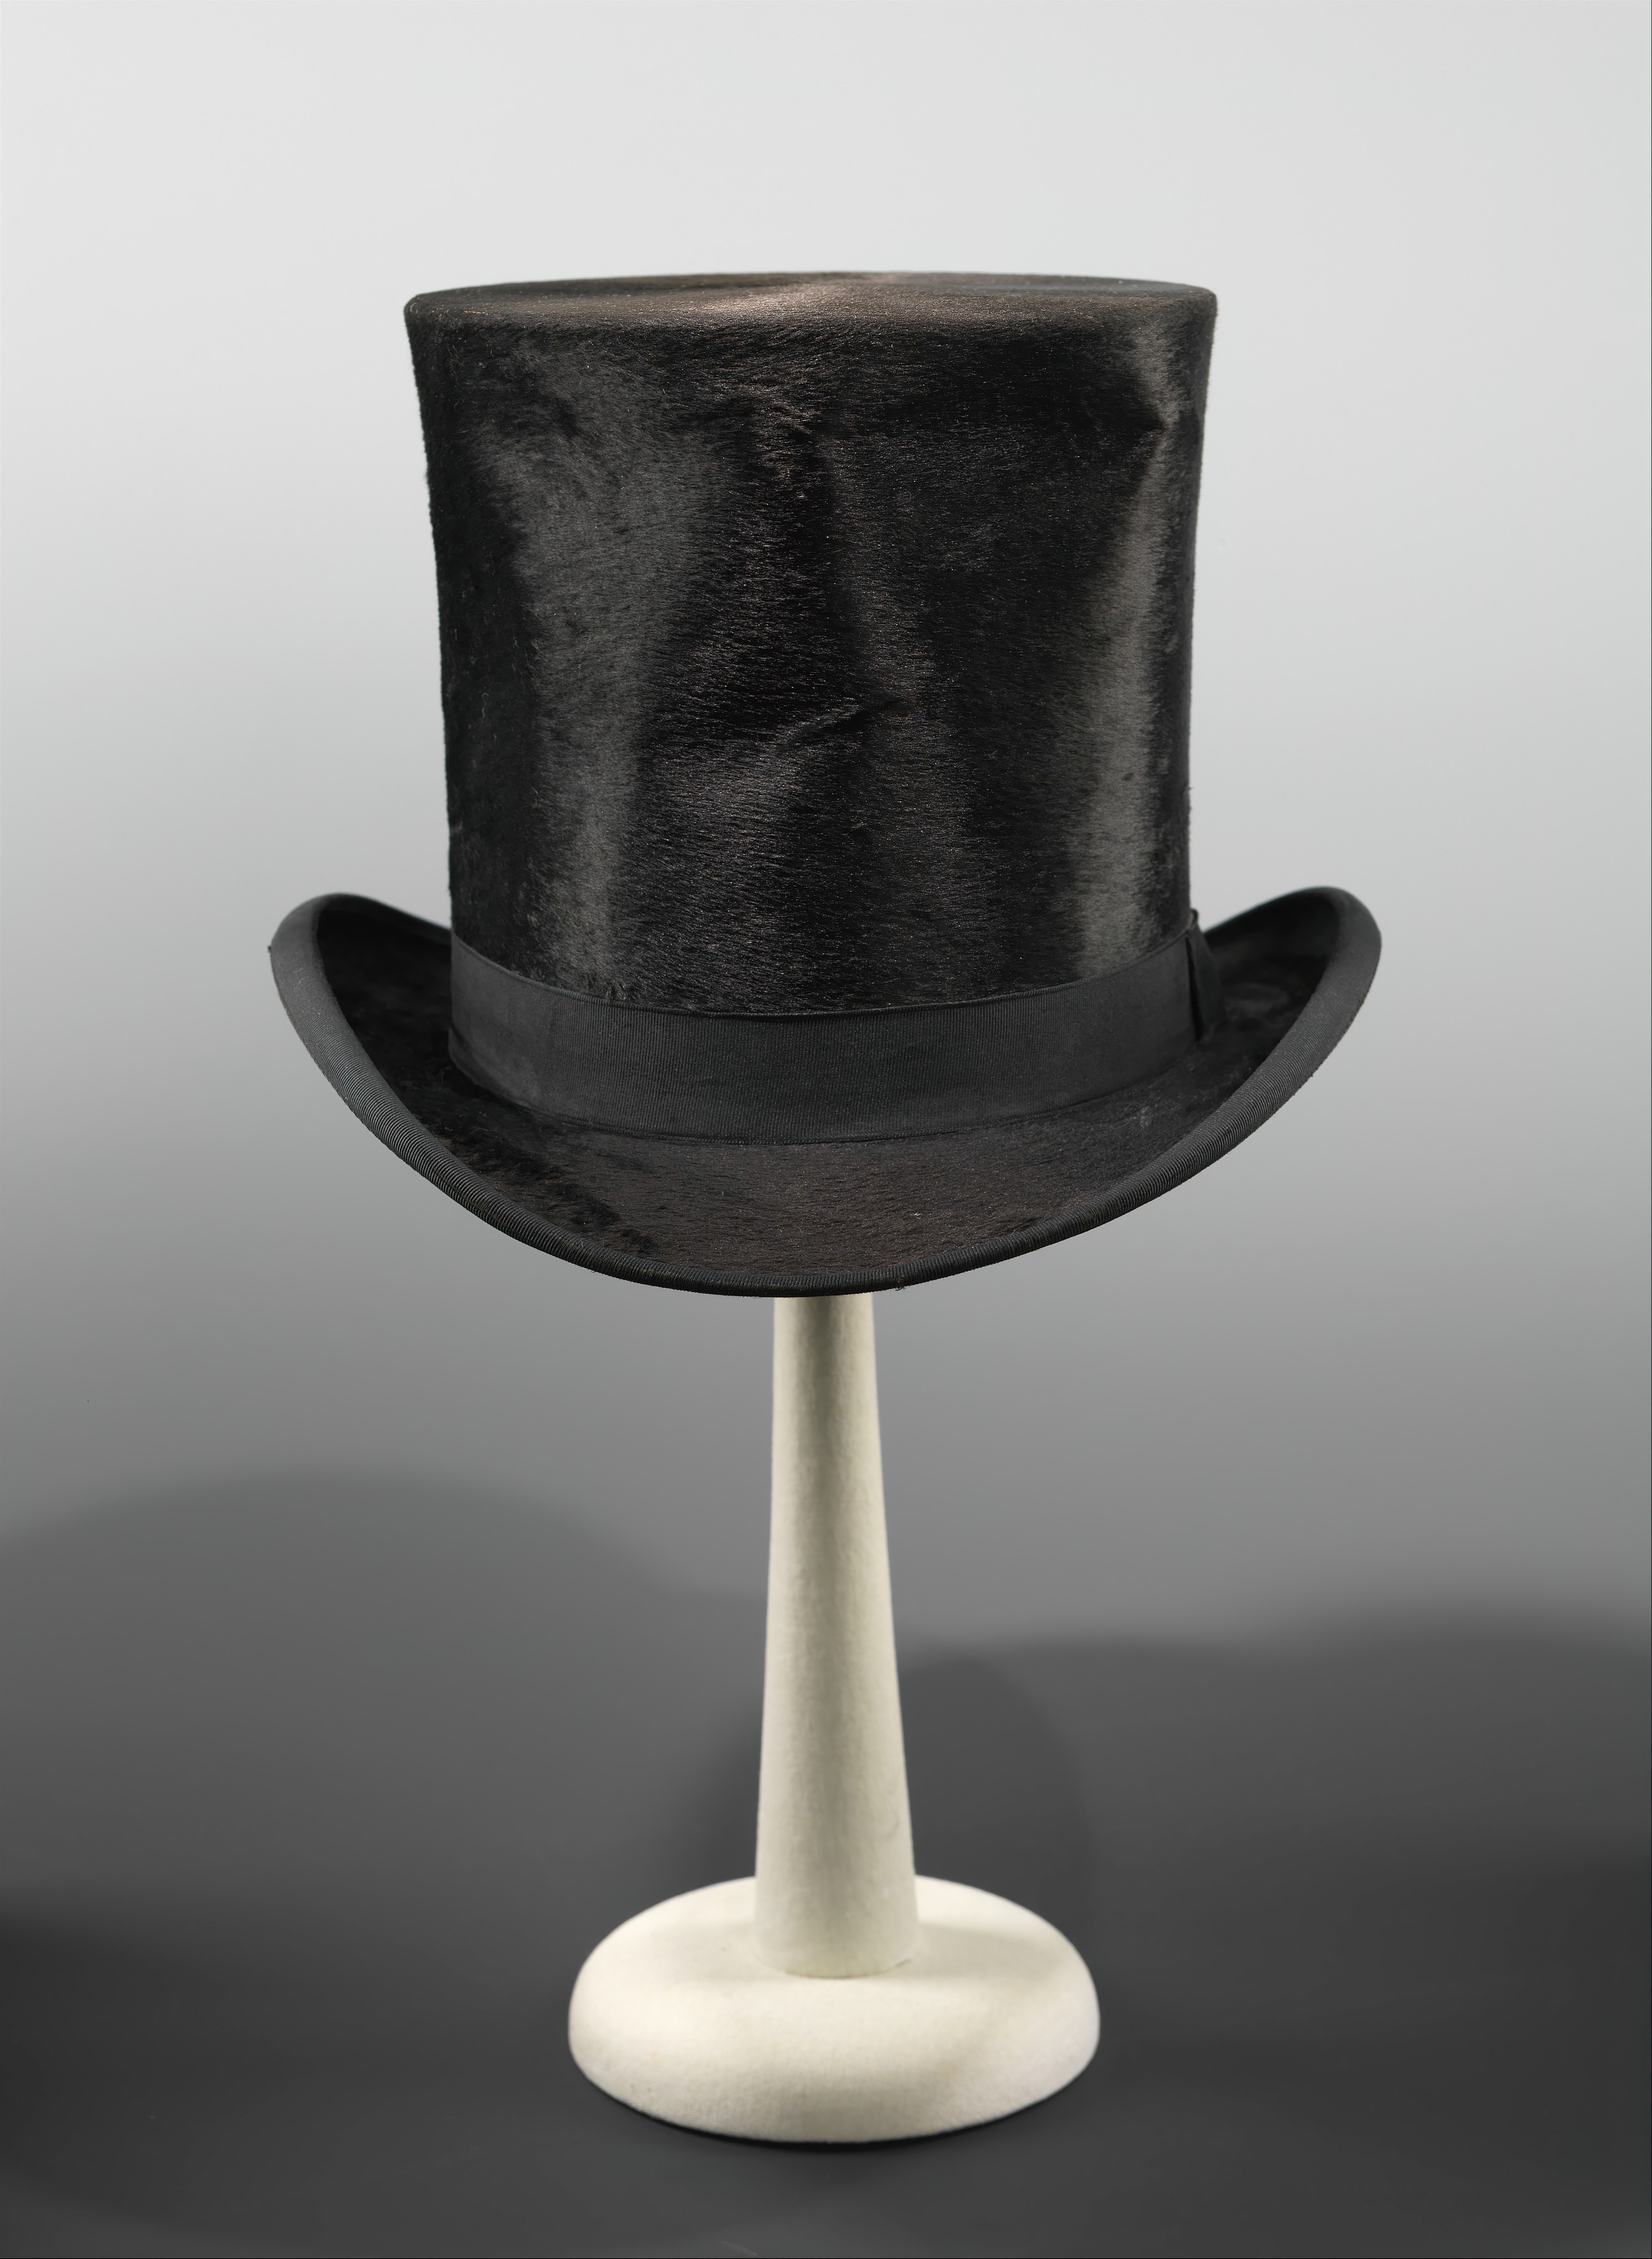 A vintage top hat displayed on a stand with a neutral background